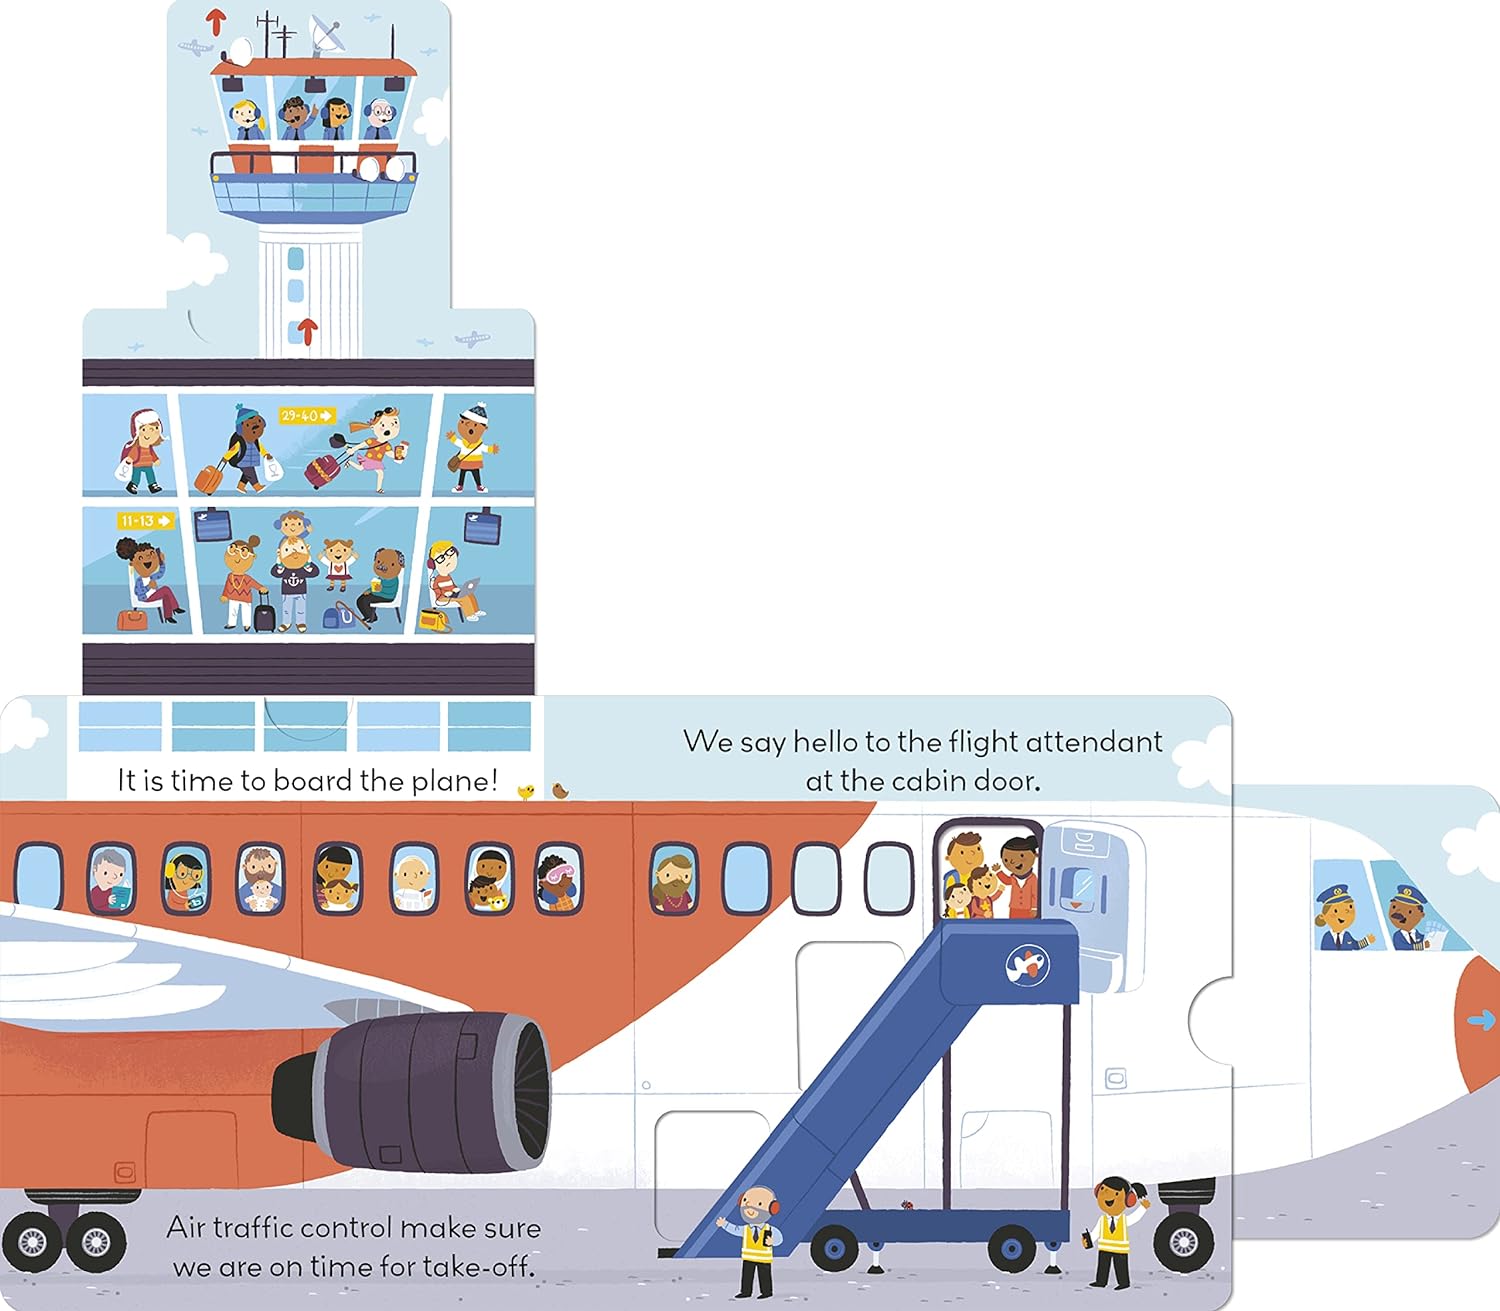 Little World: At The Airport (A Push-and-Pull Adventure)